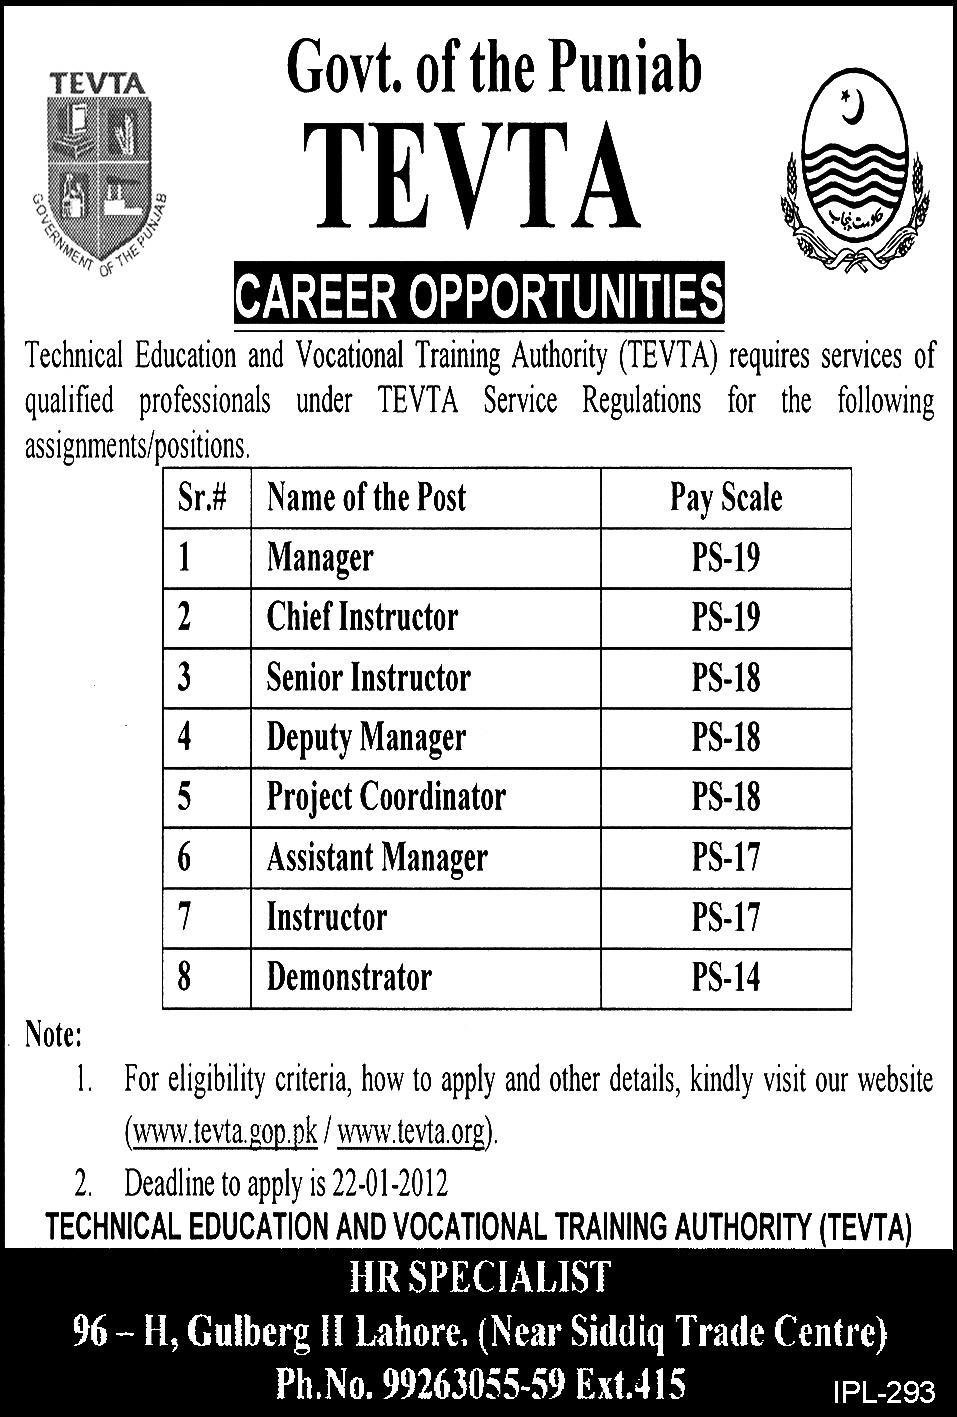 TEVTA Government of the Punjab Jobs Opportunity